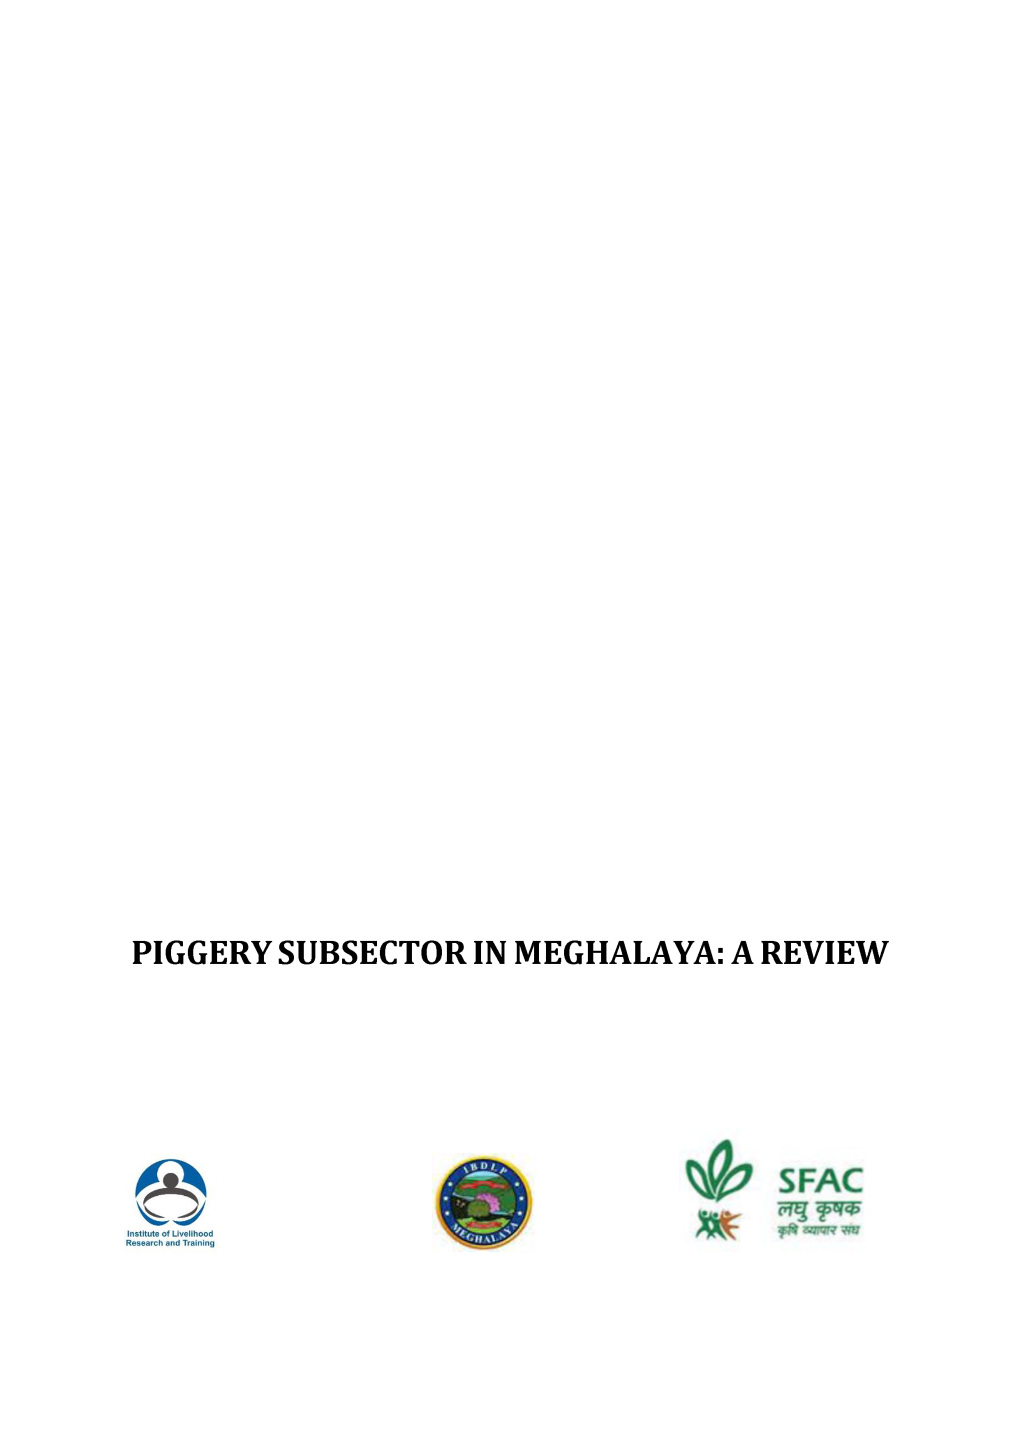 PIGGERY SUBSECTOR in MEGHALAYA: a REVIEW Author and Edited By;